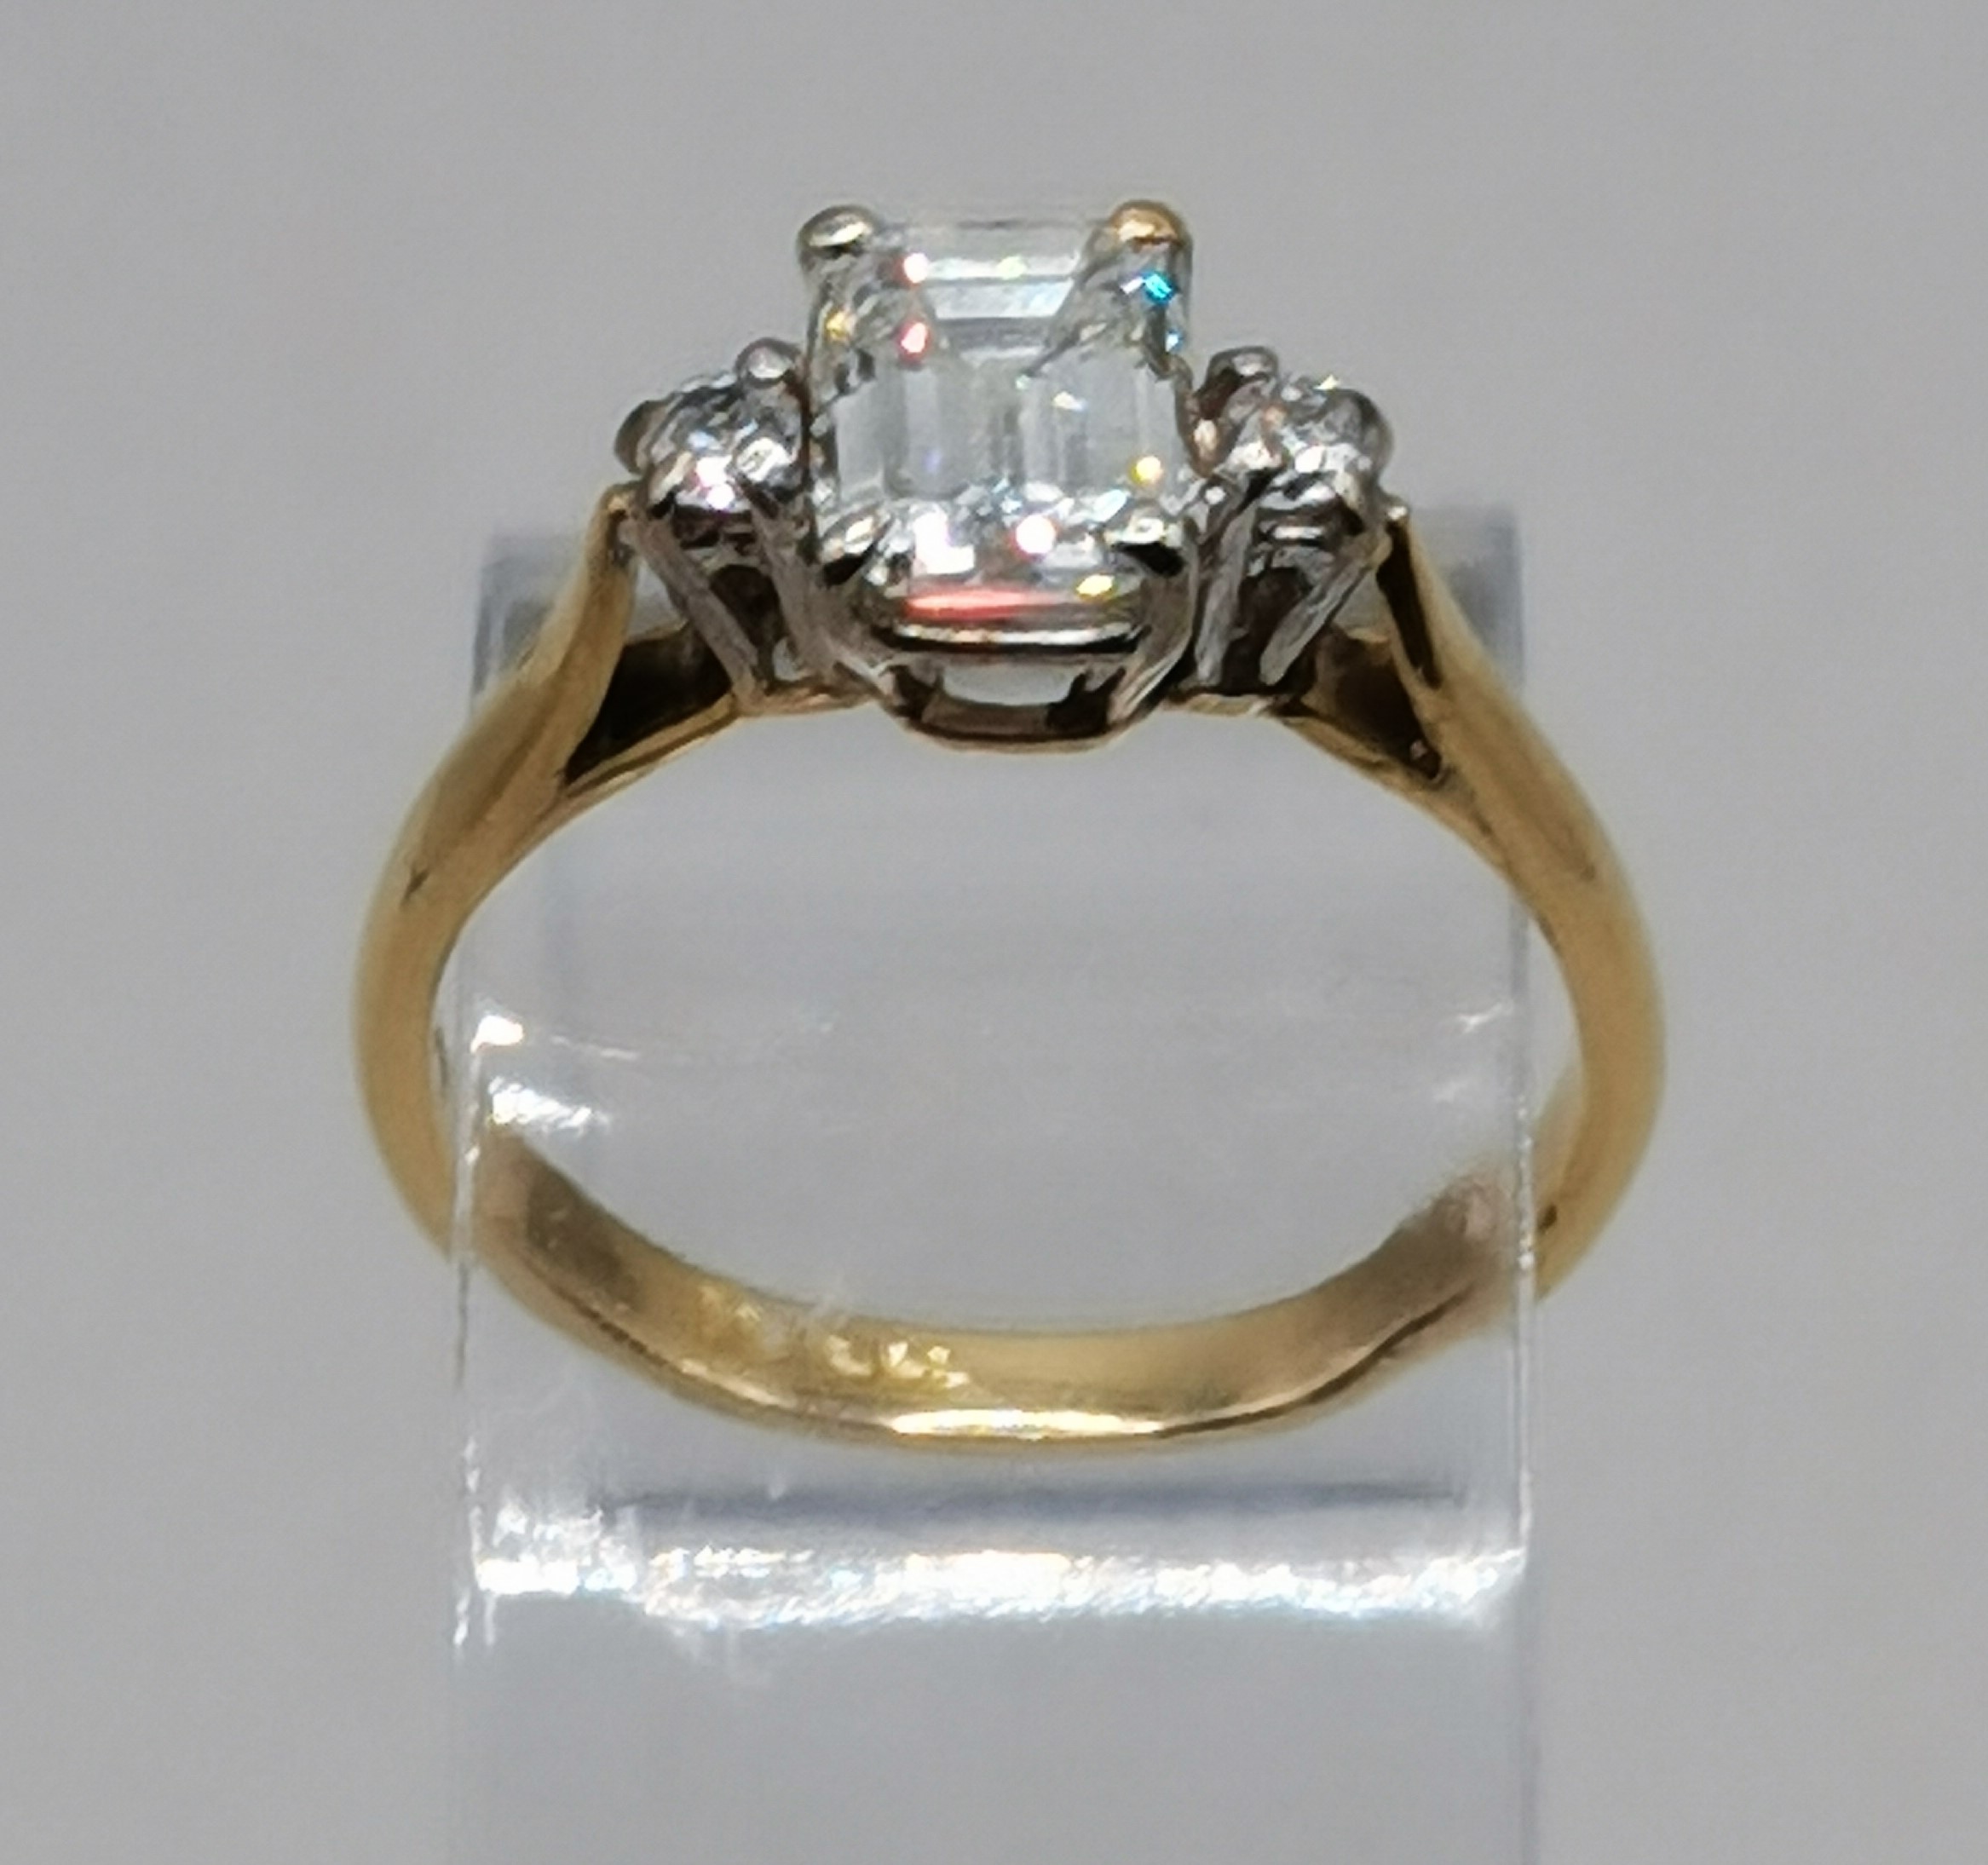 Diamond Ring - Emerald Cut 1.03 with 10 points either side in 18carat yellow gold size J